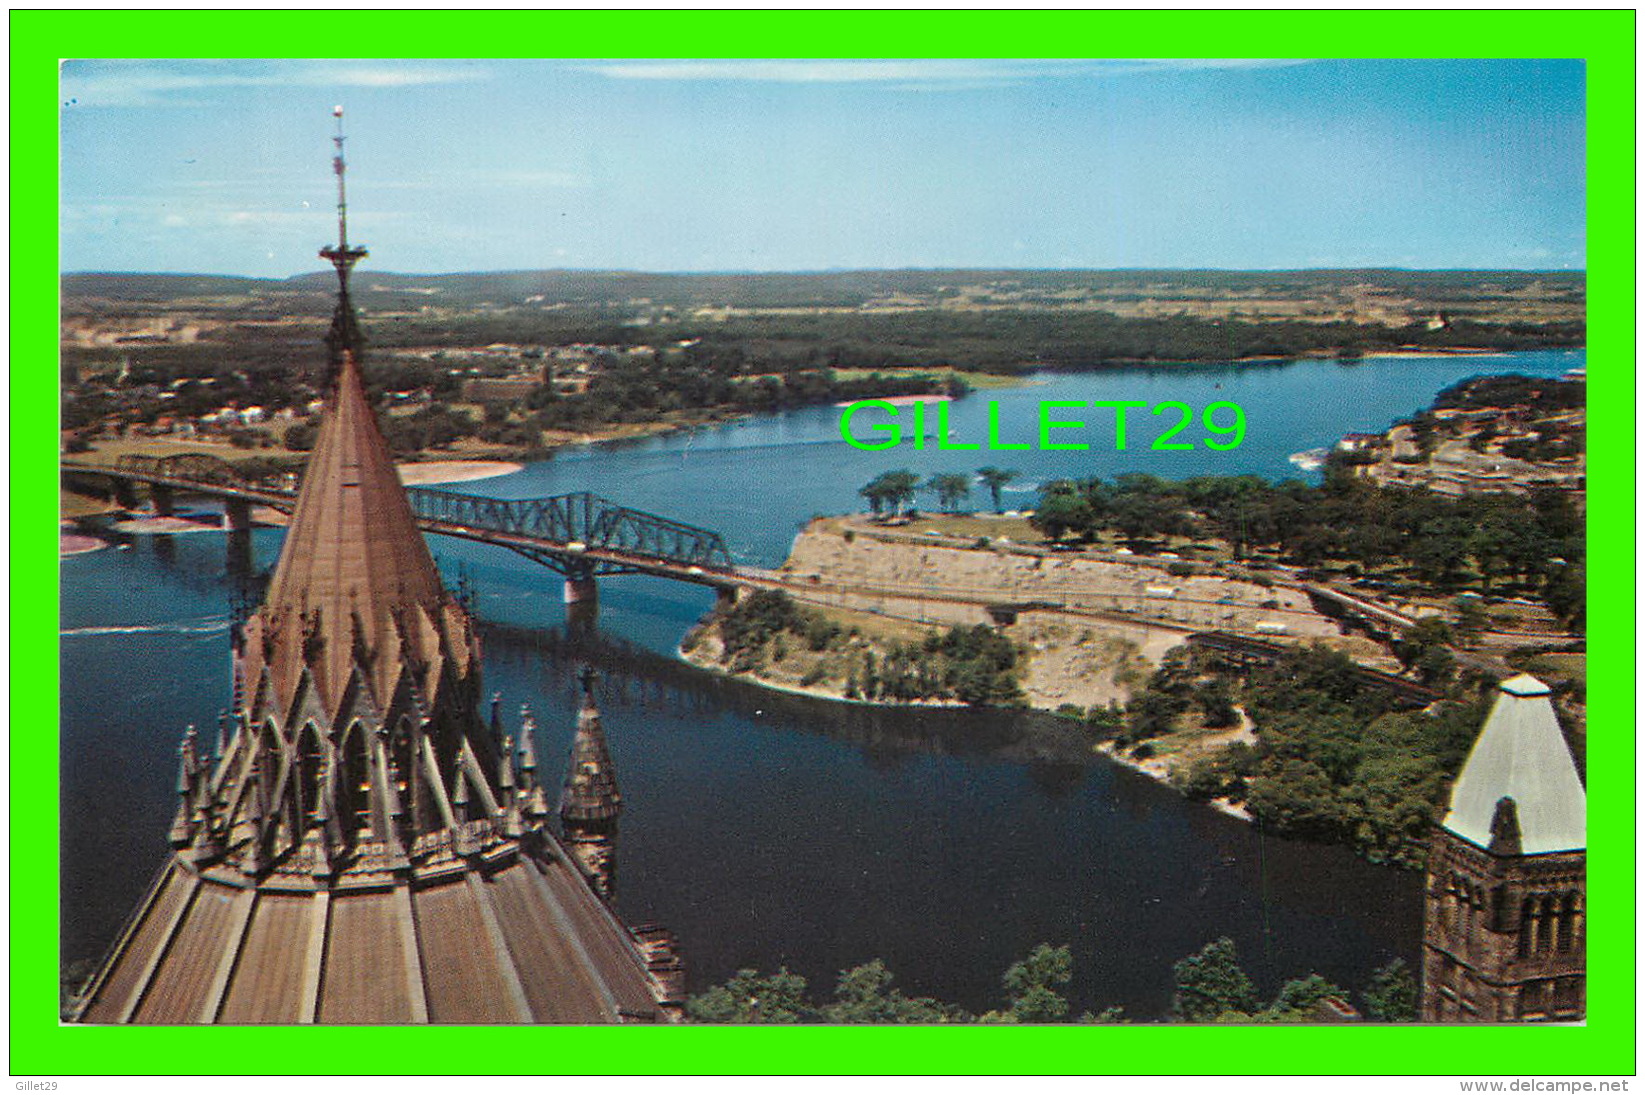 OTTAWA, ONTARIO -  VIEW FROM THE PEACE TOWER BALCONY SHOWING NEPEAN POINT - NATIONAL NEWS CO LTD - - Ottawa